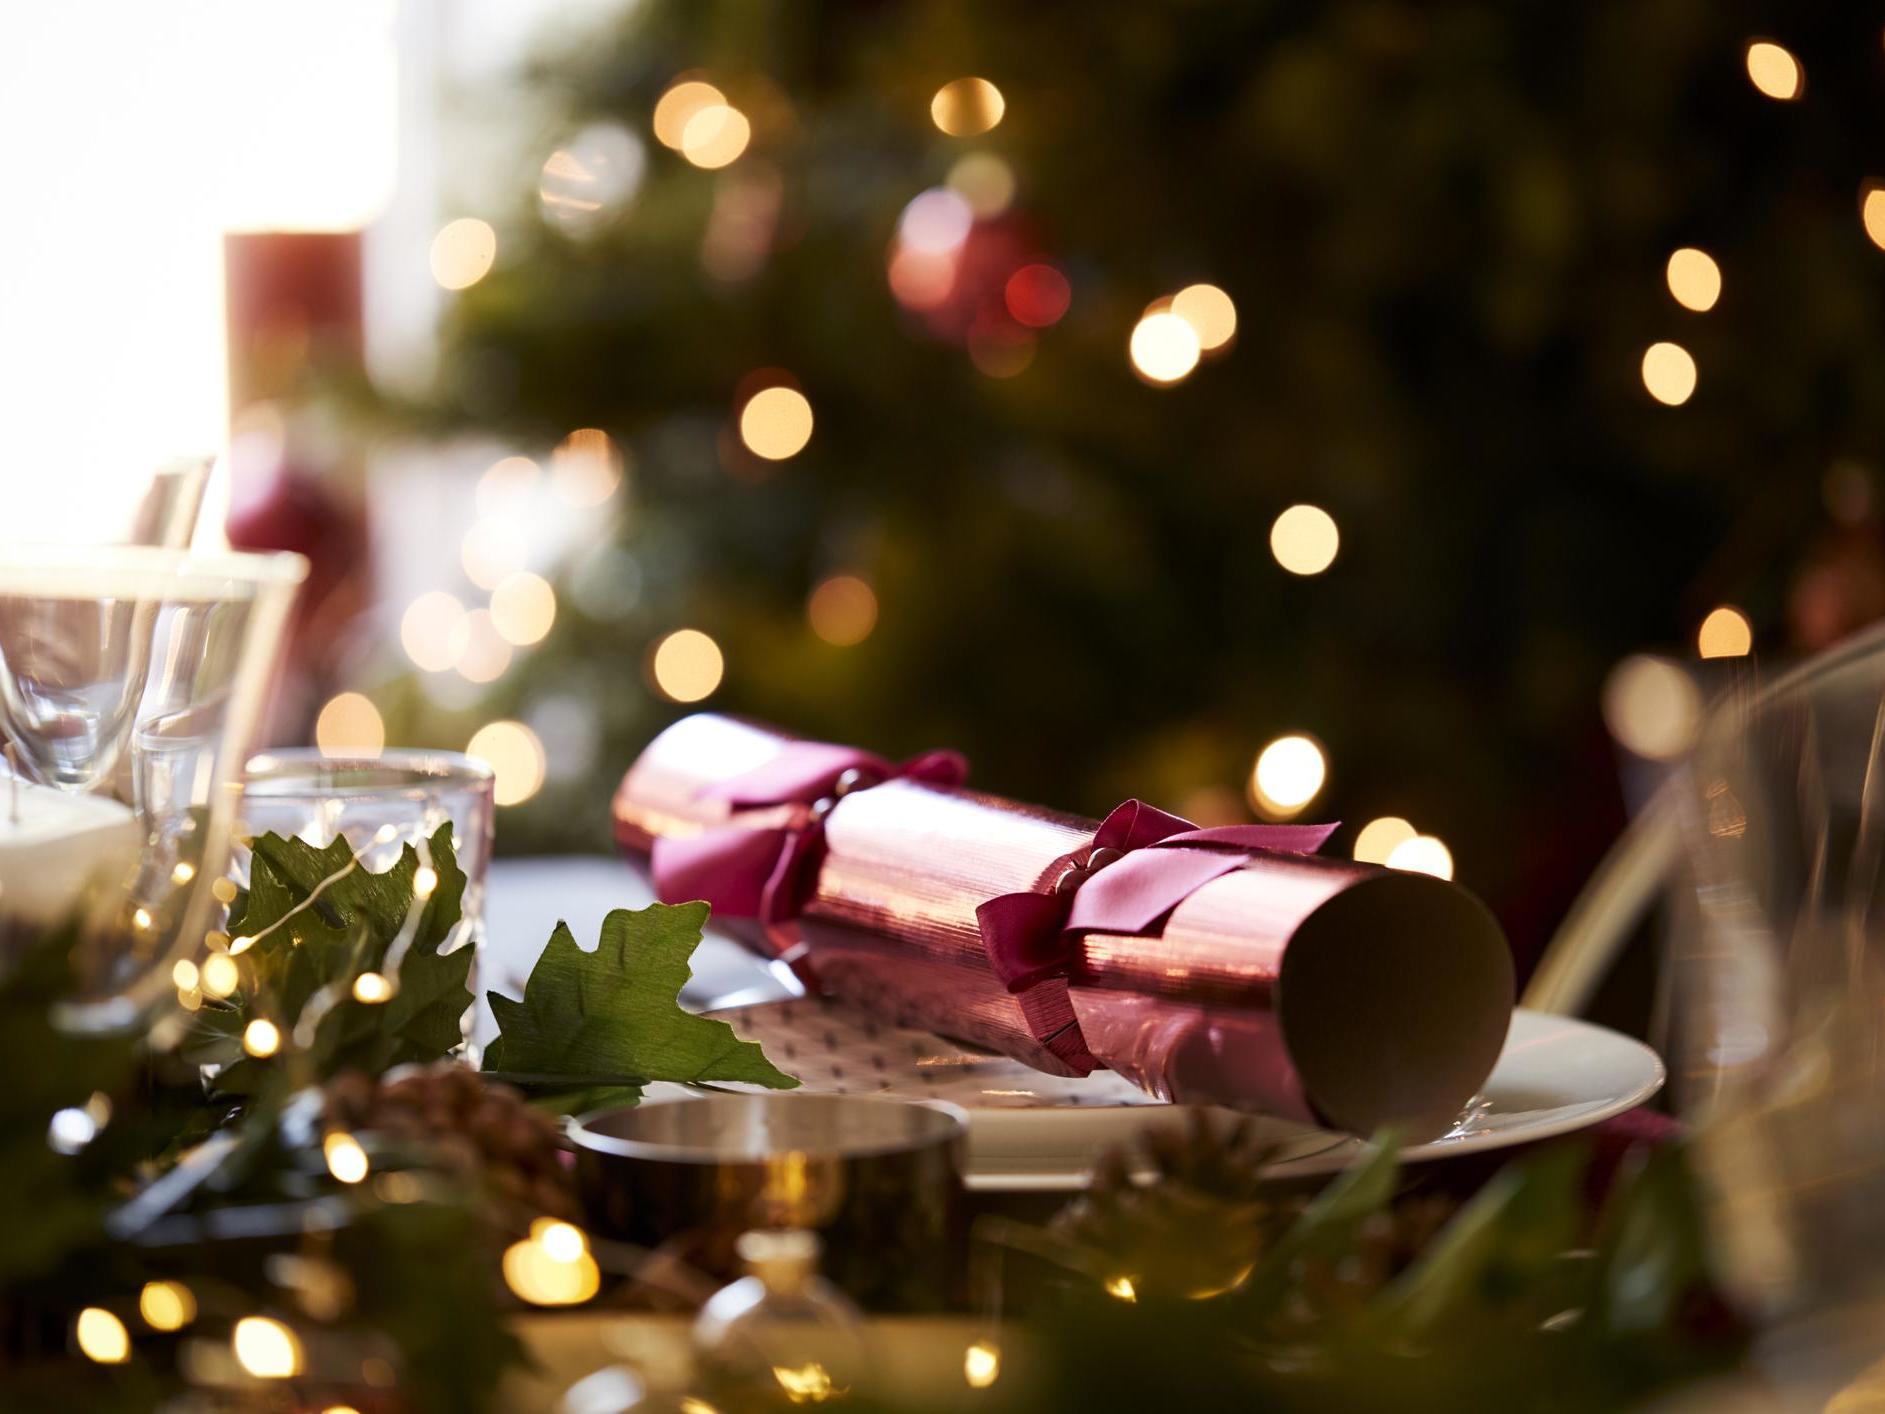 The average household in the UK will spend £1,811.70 on Christmas festivities this year